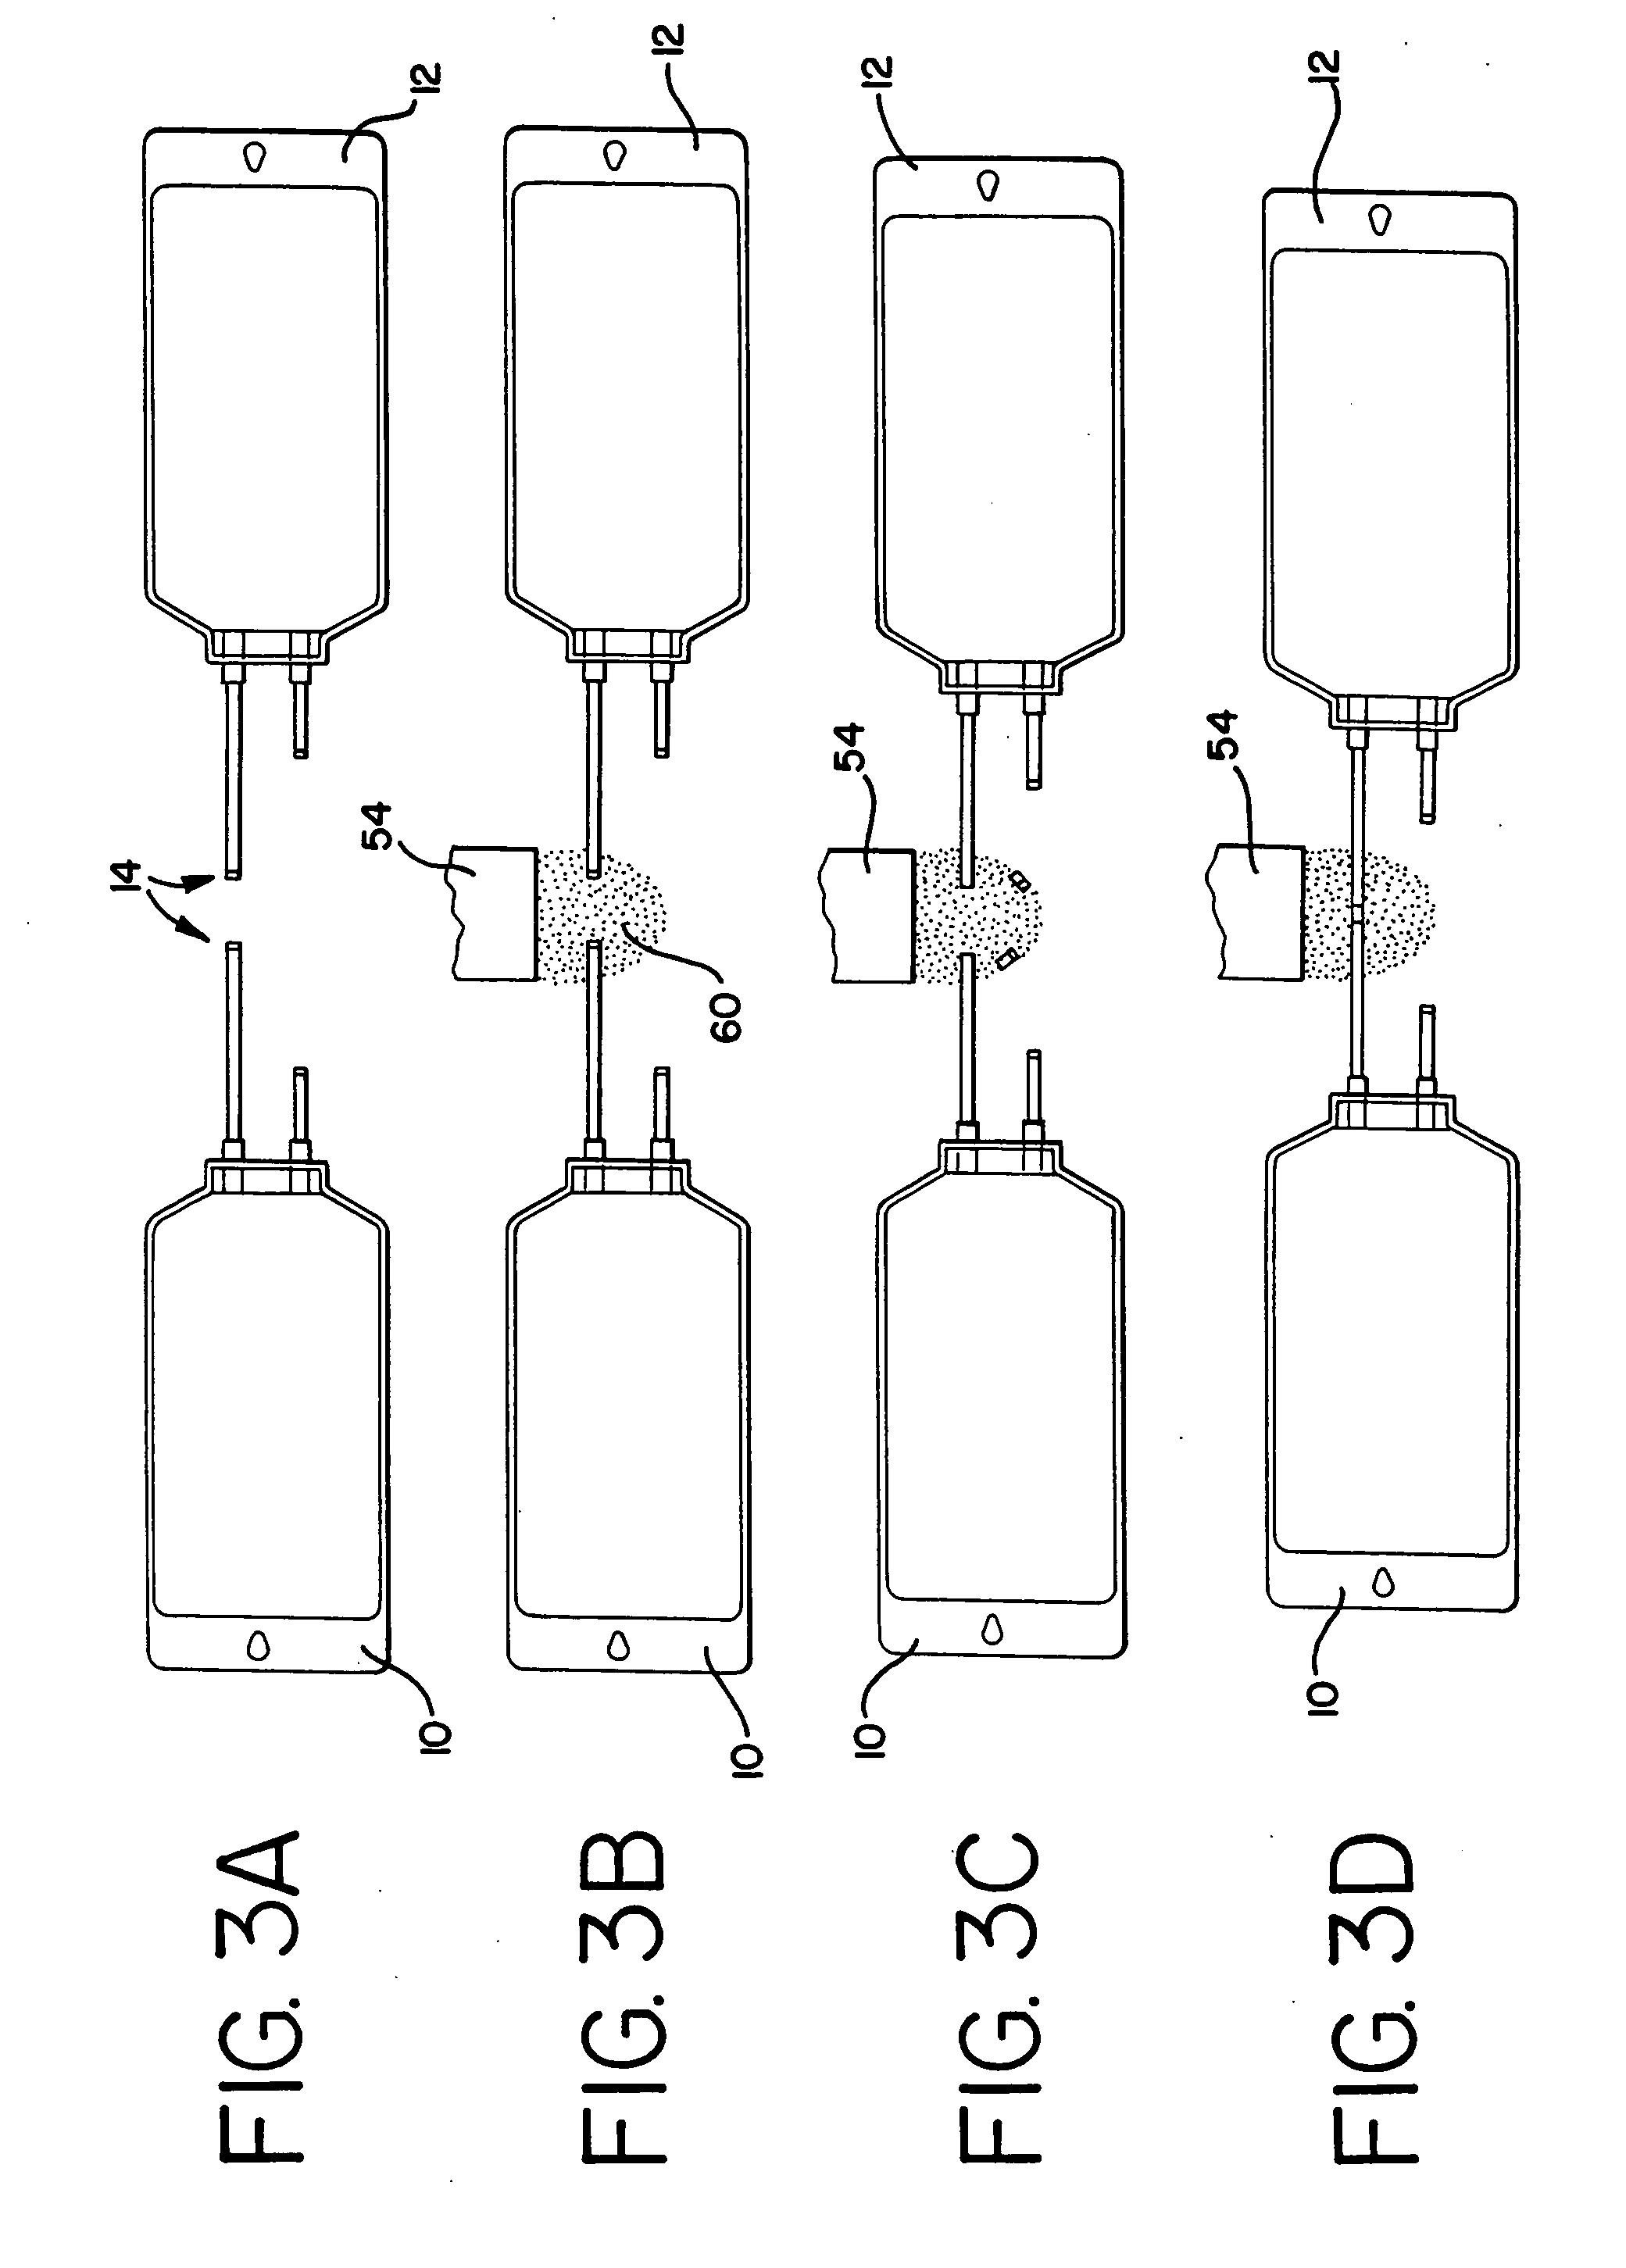 Method and apparatus for manipulating pre-sterilized components in an active sterile field